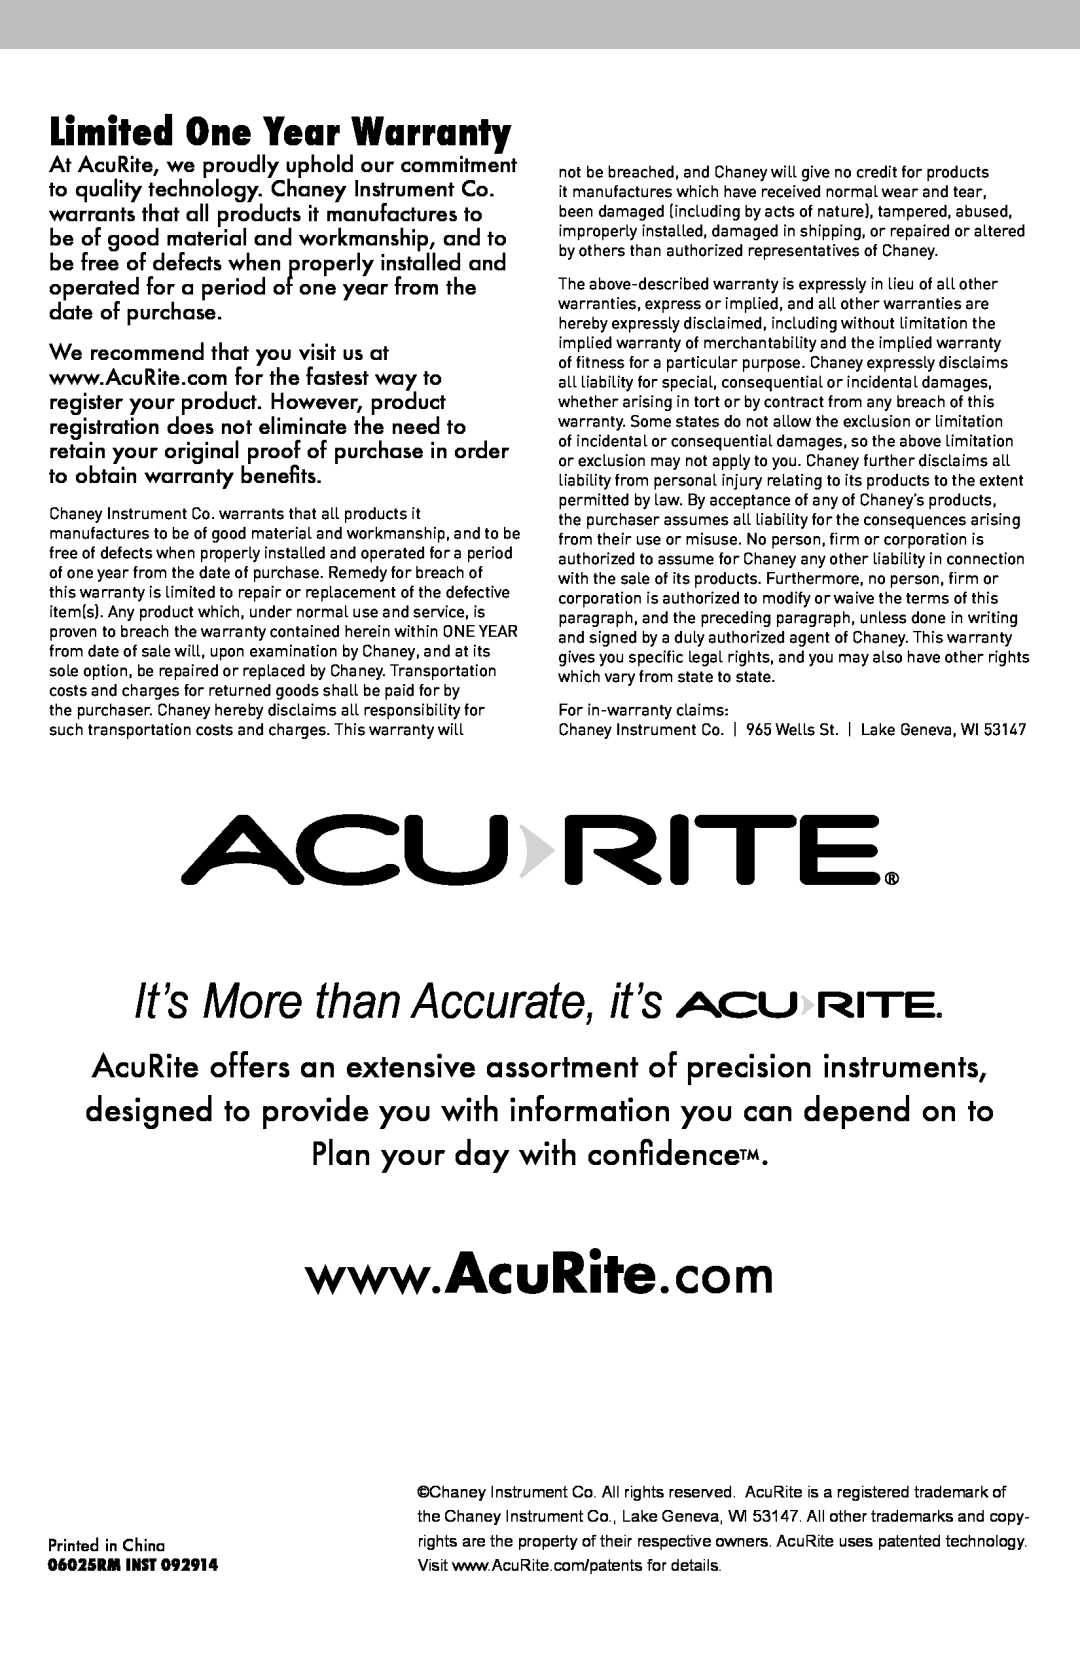 Acu-Rite instruction manual Limited One Year Warranty, It’s More than Accurate, it’s, 06025RM INST 